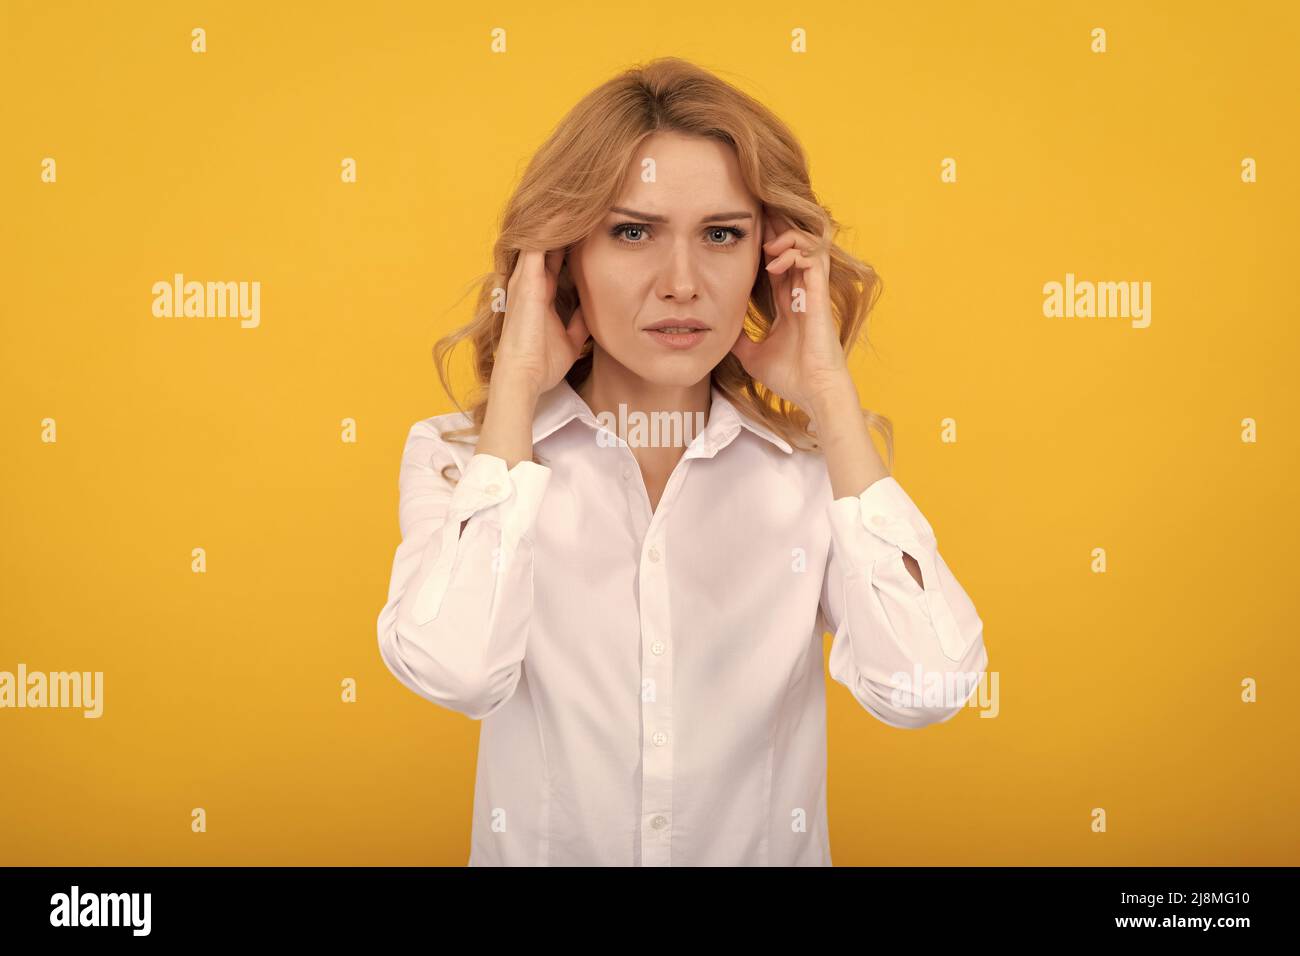 Unhappy ill woman touch ears suffering from ear pain yellow background, earache Stock Photo